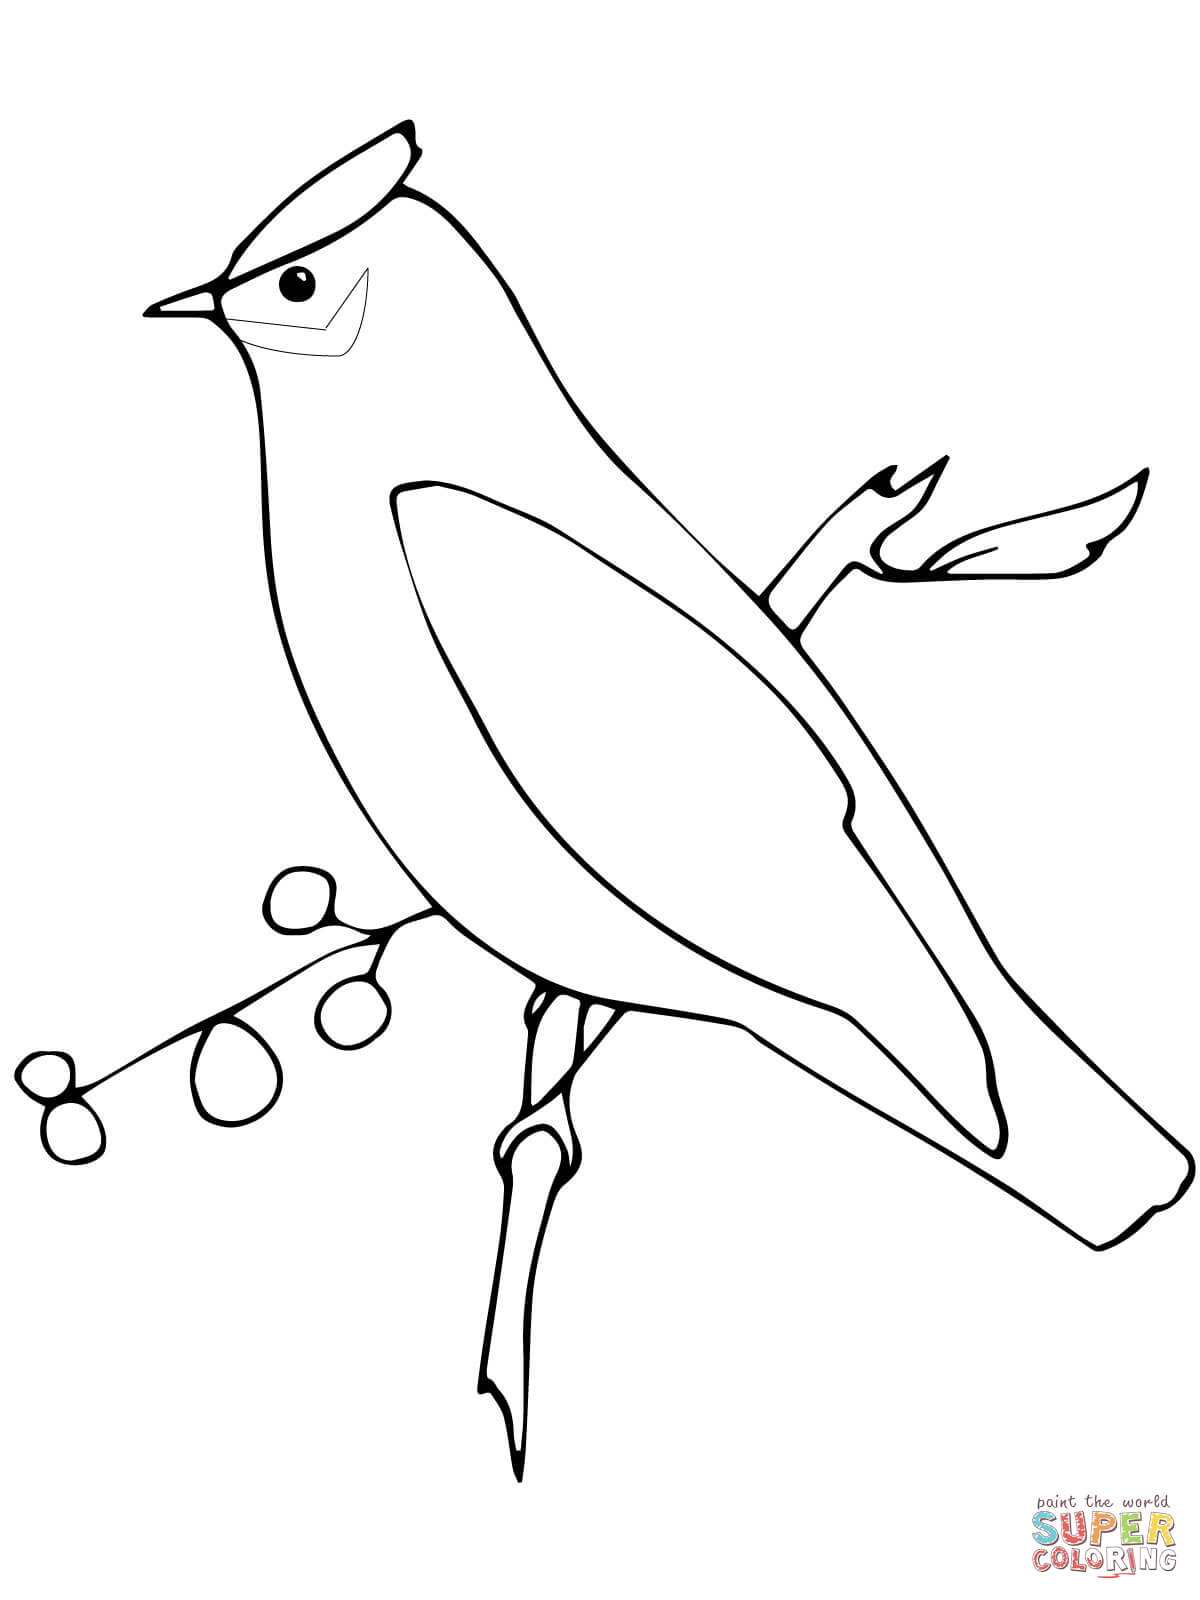 Waxwing coloring #14, Download drawings